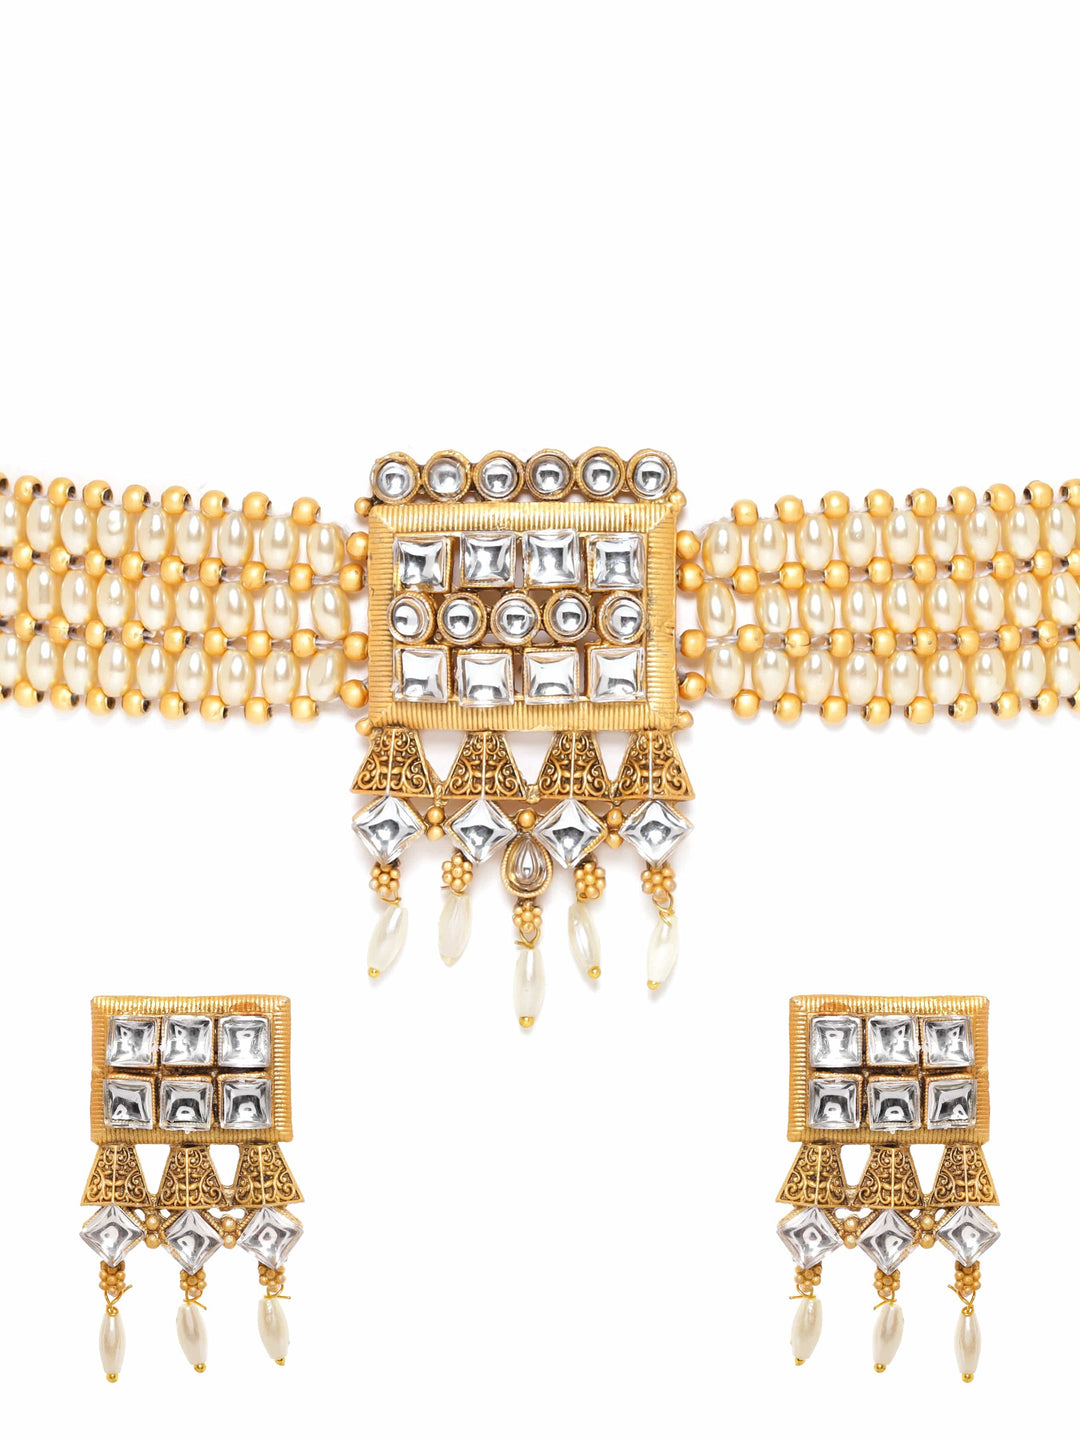 Rubans Gold Pendant Choker Set with White Beads and Stone Accents Jewellery Sets